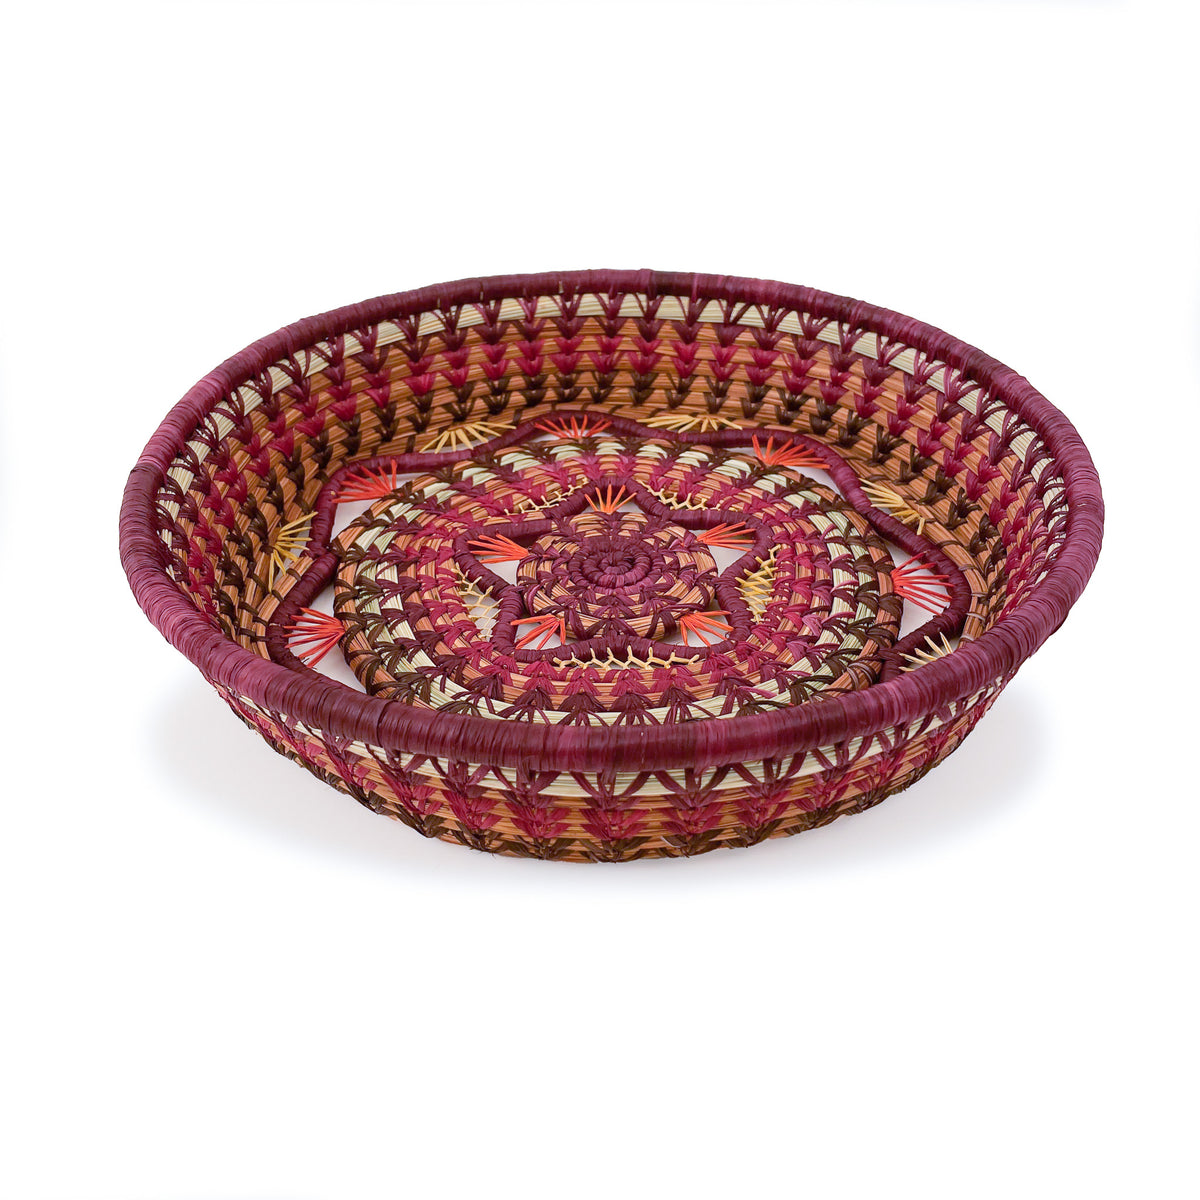 Angled view of Rosenda Basket in Wine, featuring a wine-color rim, scallop detail, and star-shaped accent in center, with raffia detailing